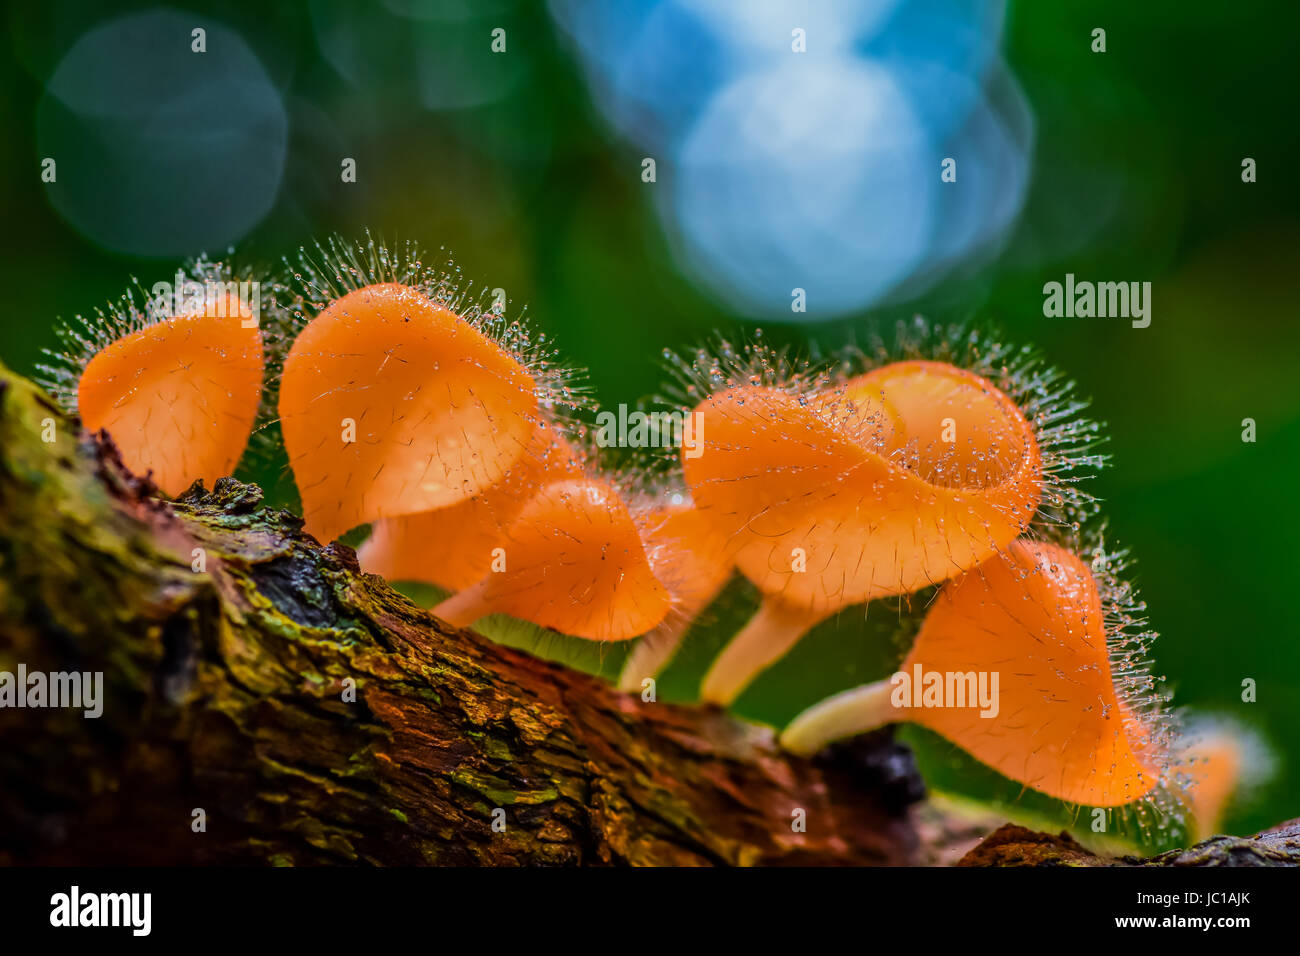 Hairy mushroom with water drops in national park of Thailand Stock Photo